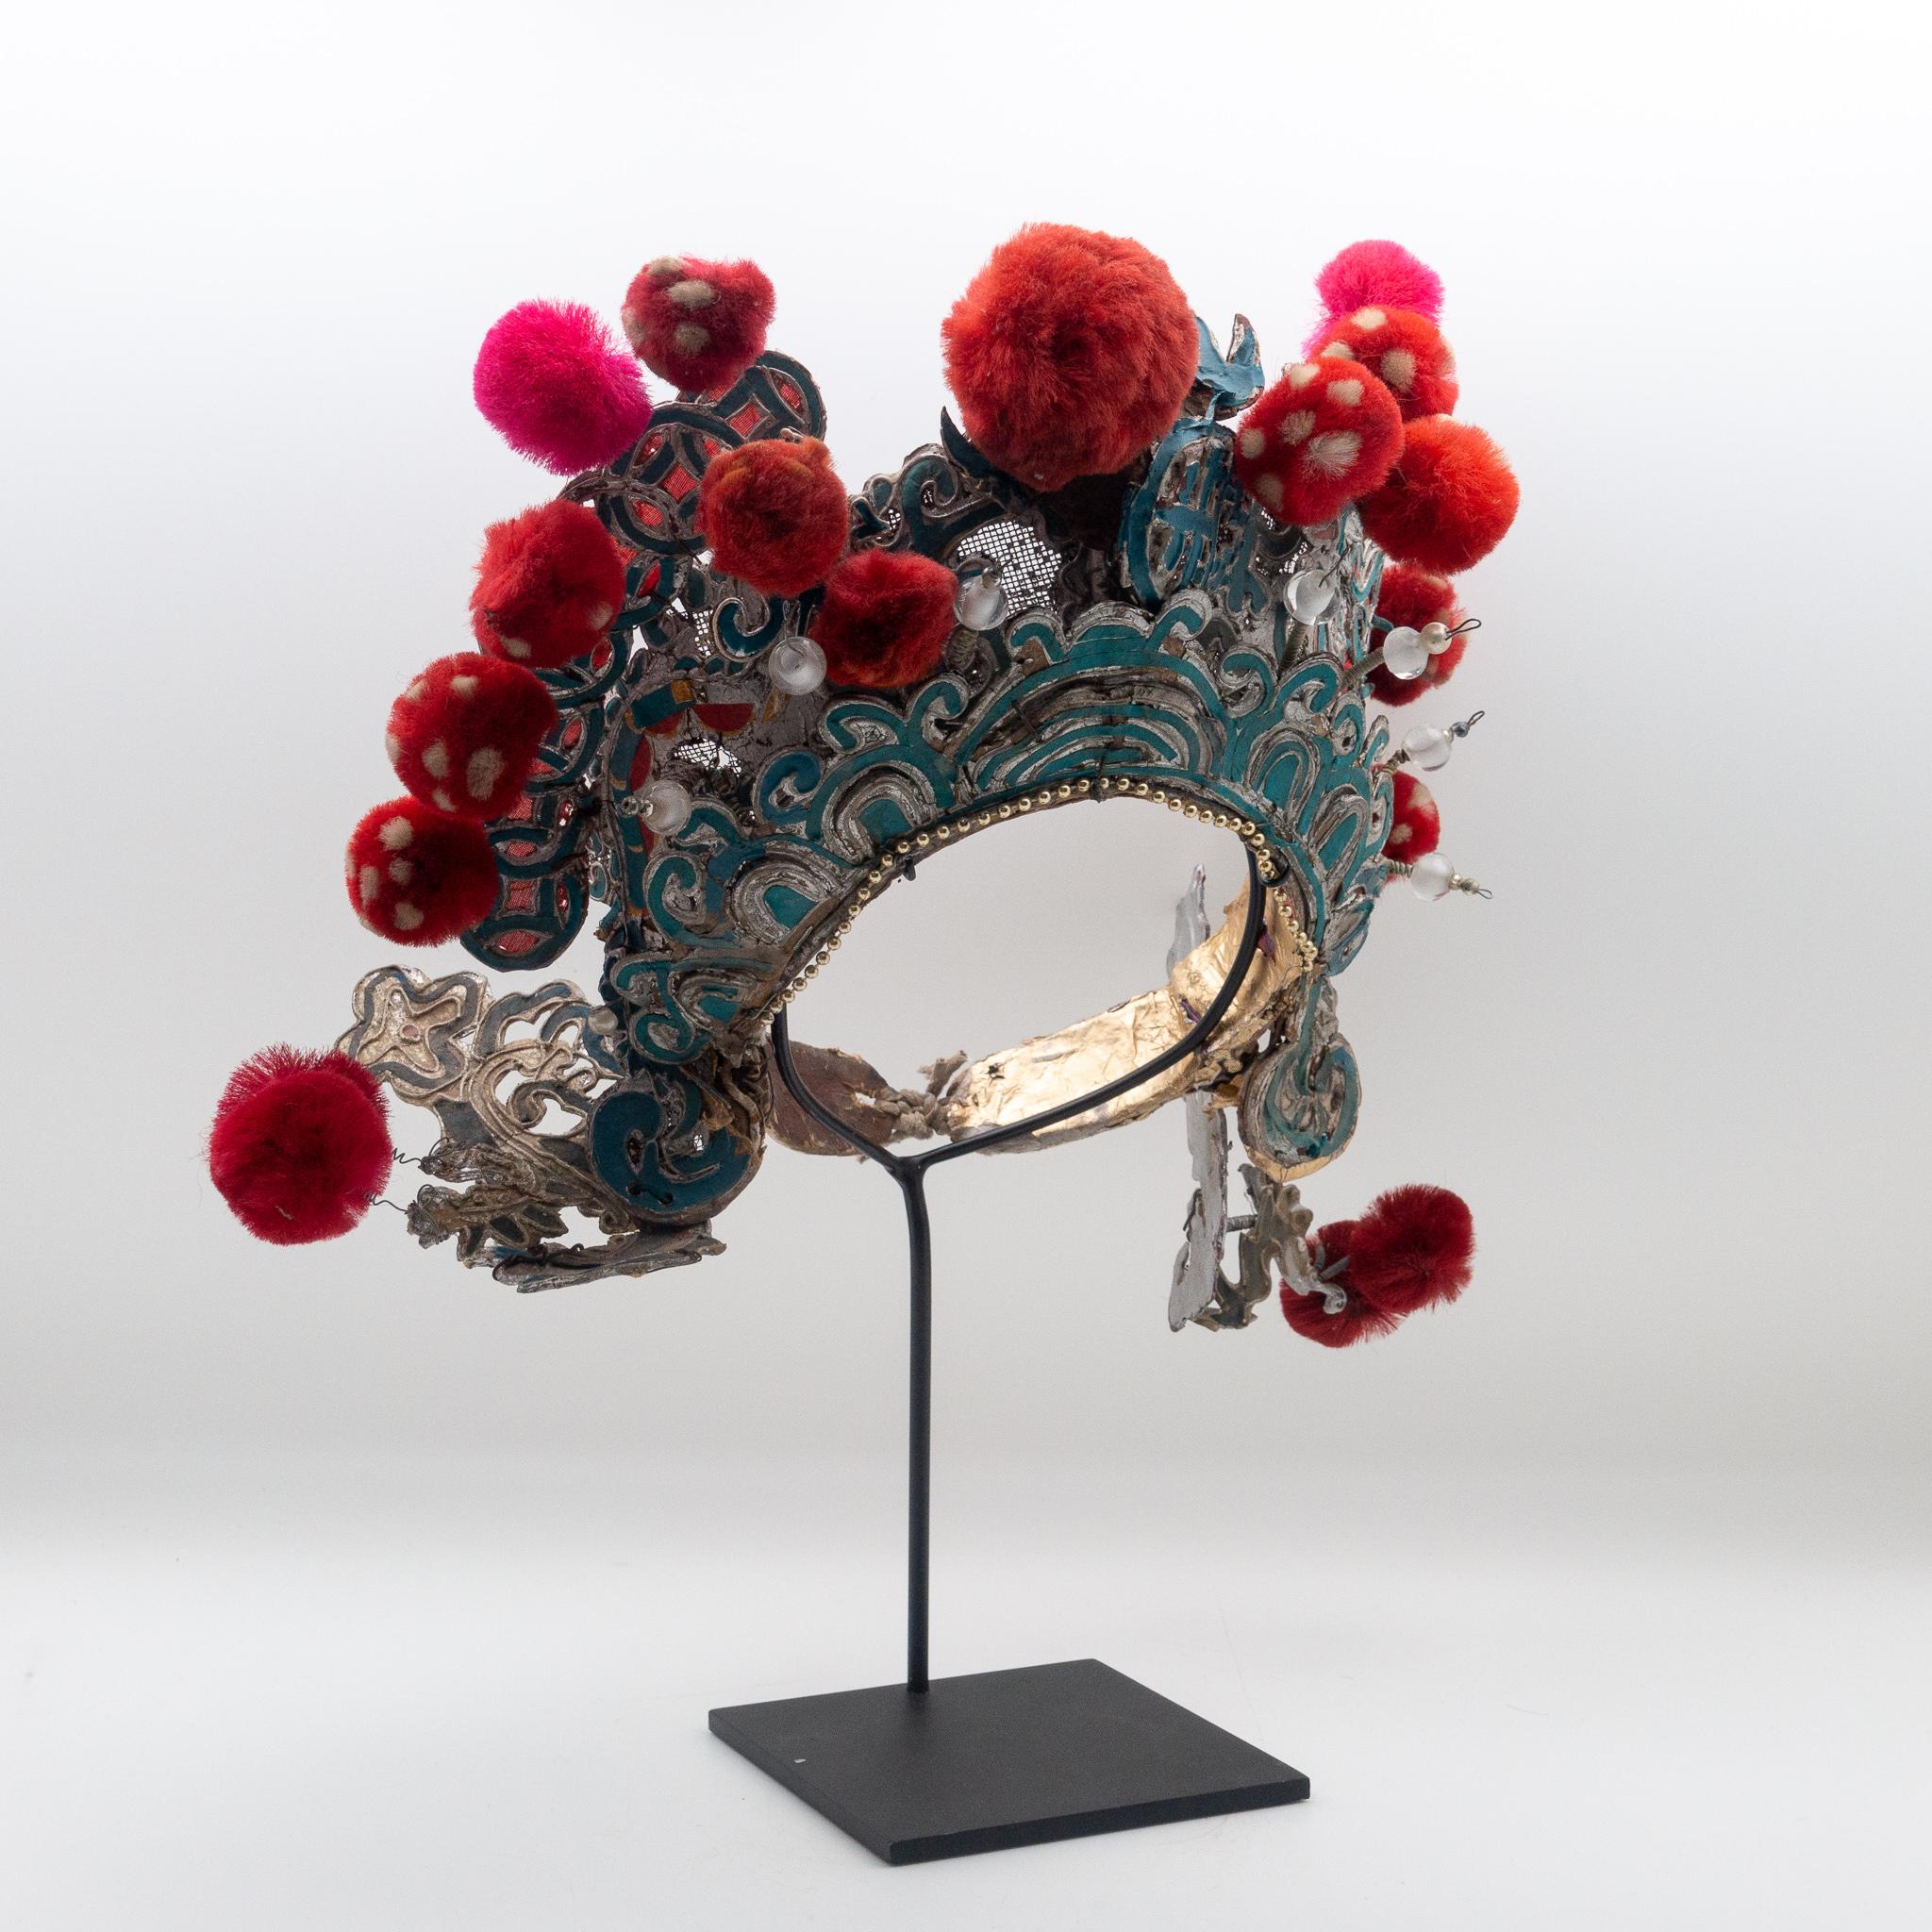 Chinese opera theatre headdress in turquoise and silver colors with red and fuchsia colored pom poms along with faux pearls, early 20th century, mounted on a custom black painted metal base.